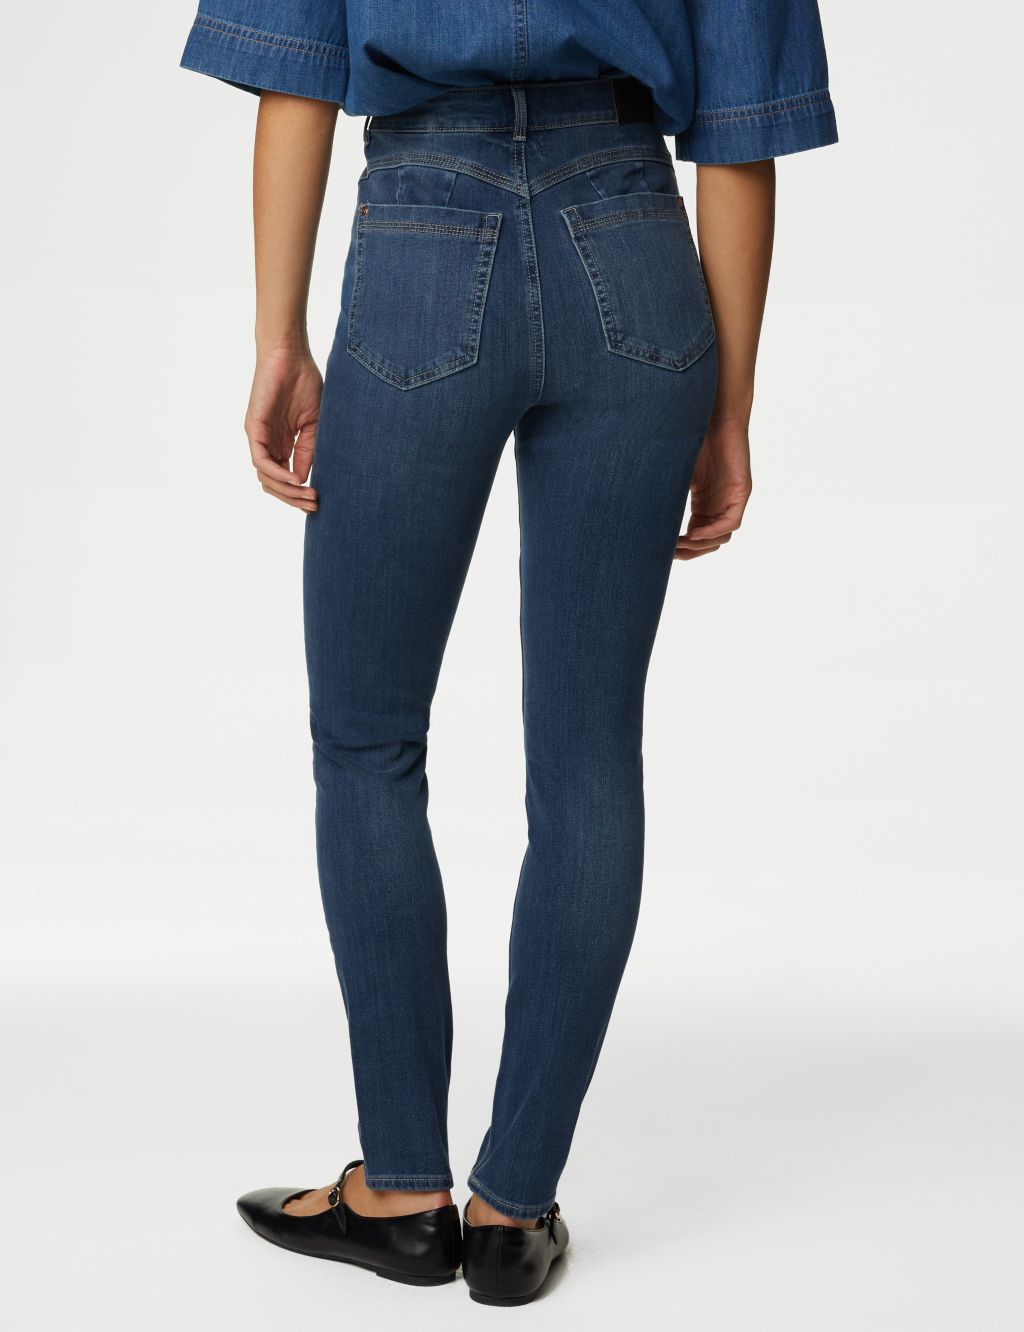 Magic Shaping High Waisted Skinny Jeans image 5